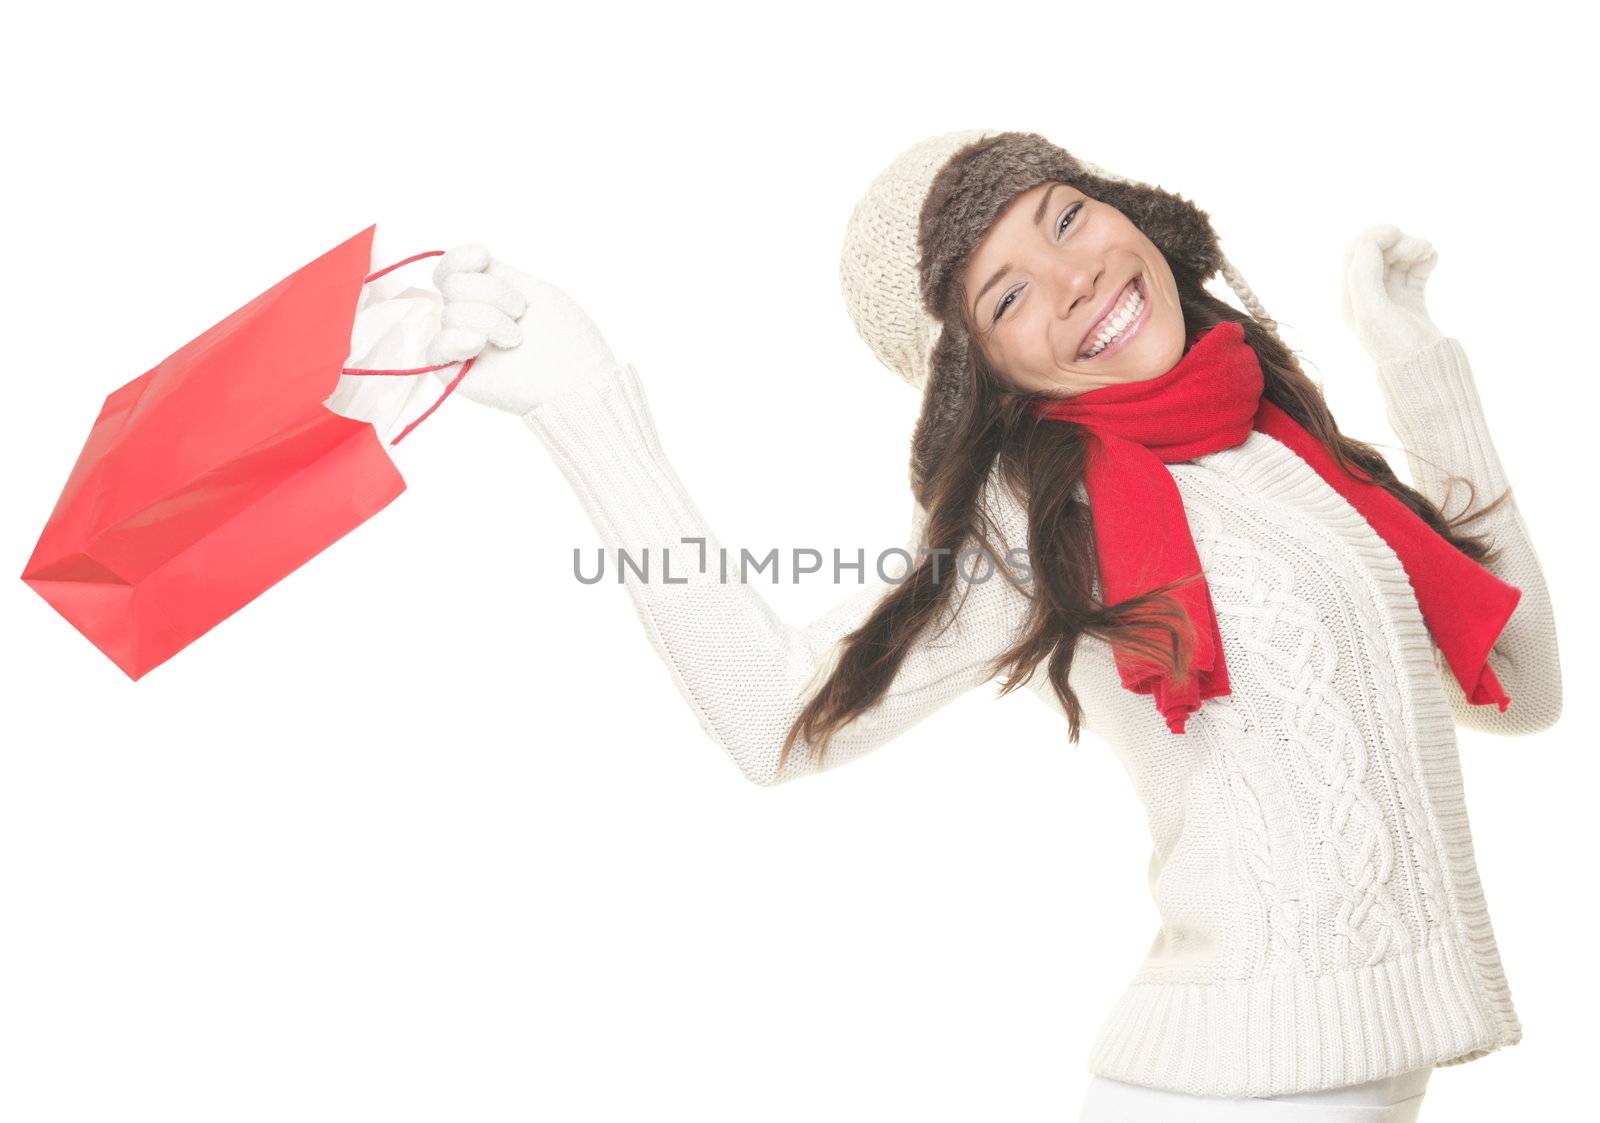 Christmas shopping woman with gift bag running joyful. Smiling young woman in winter clothes holding red shopping bags. Isolated on white background.